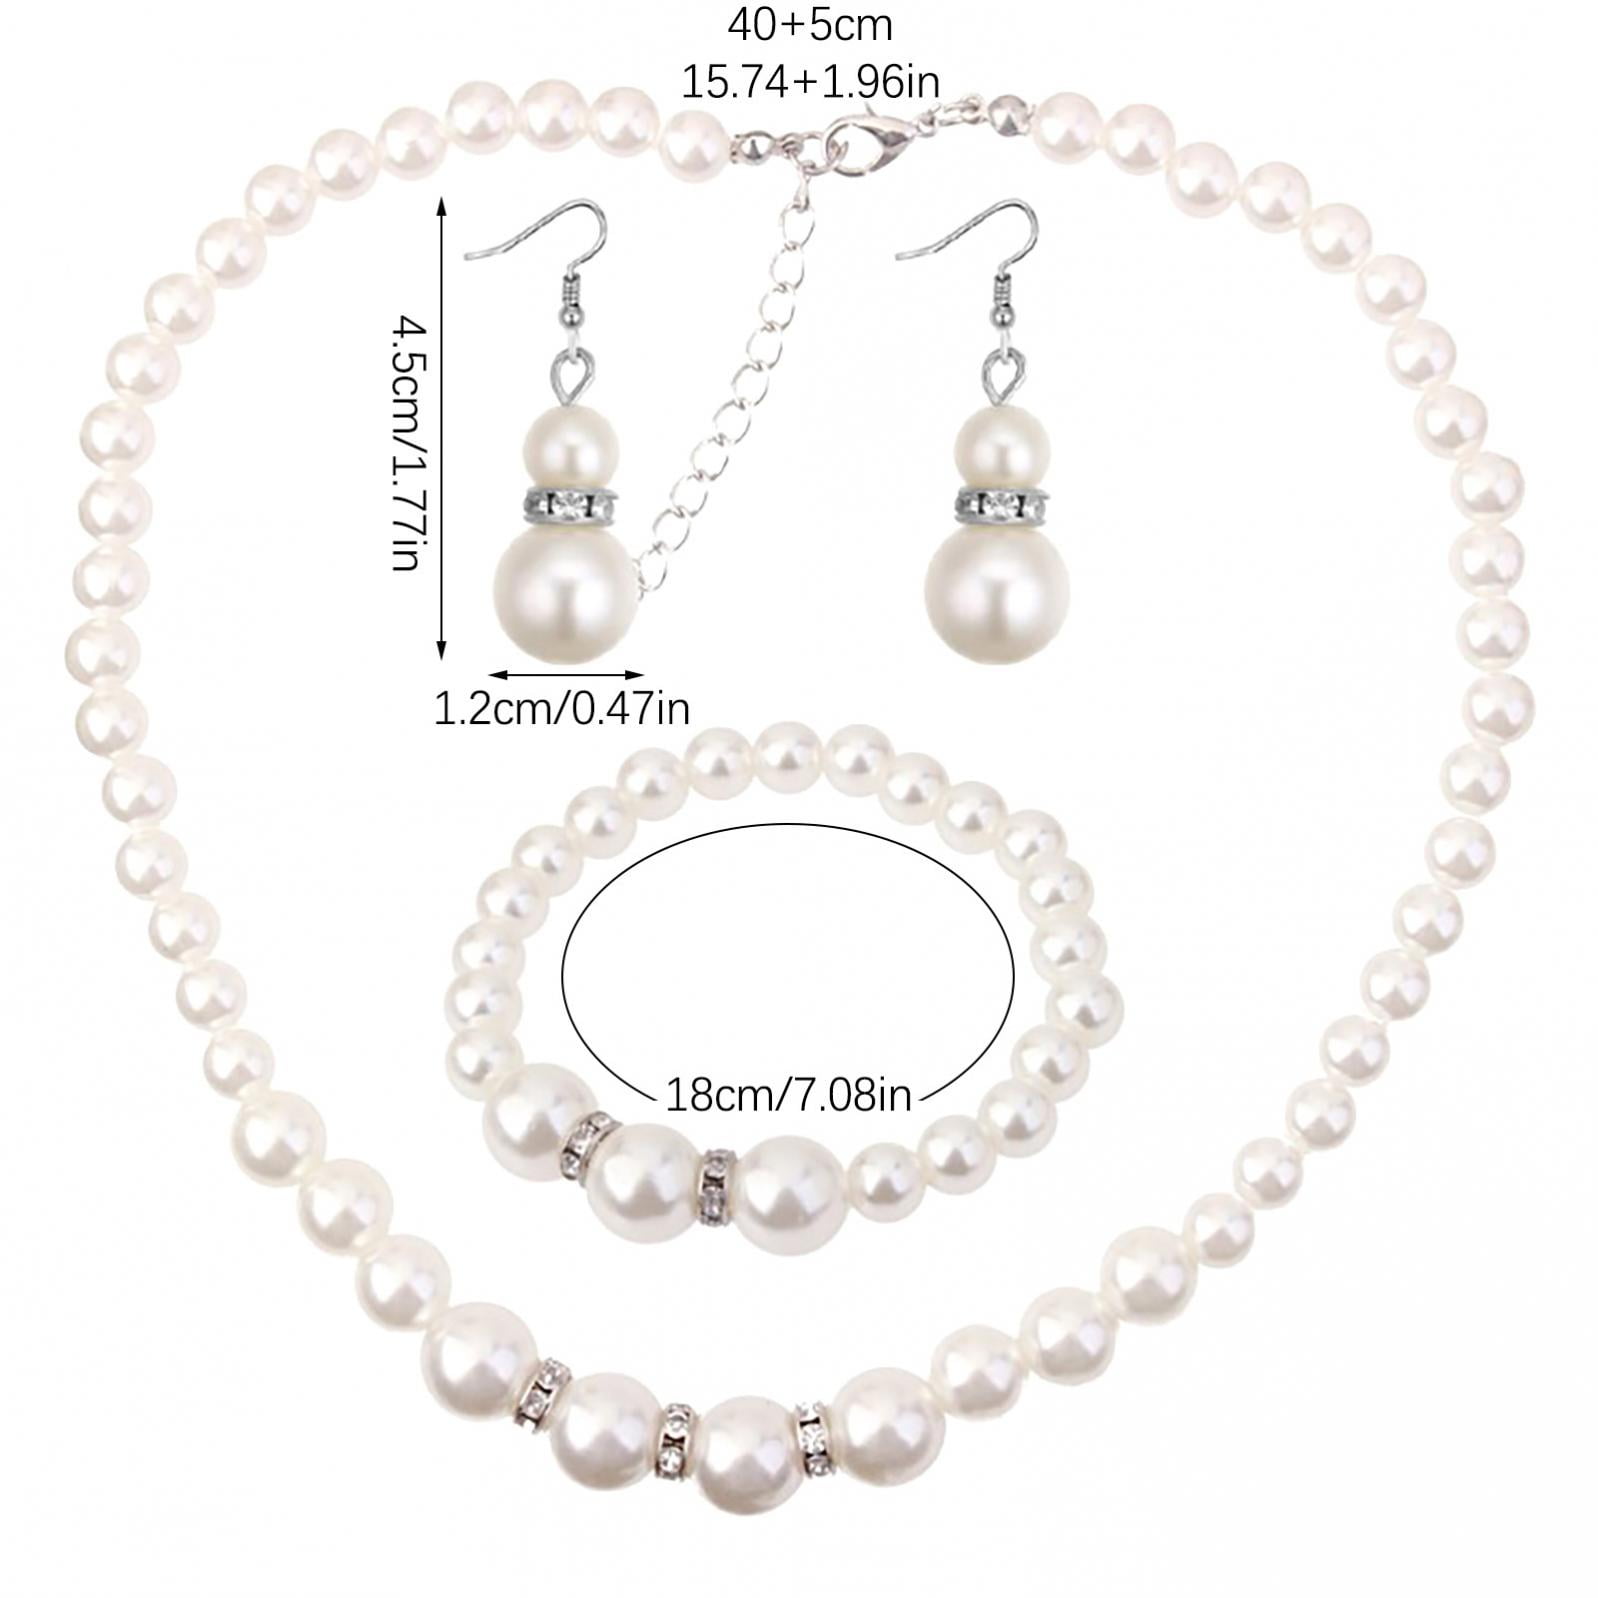 Mikimoto Ginza Black Pearl Necklace and Earrings Set